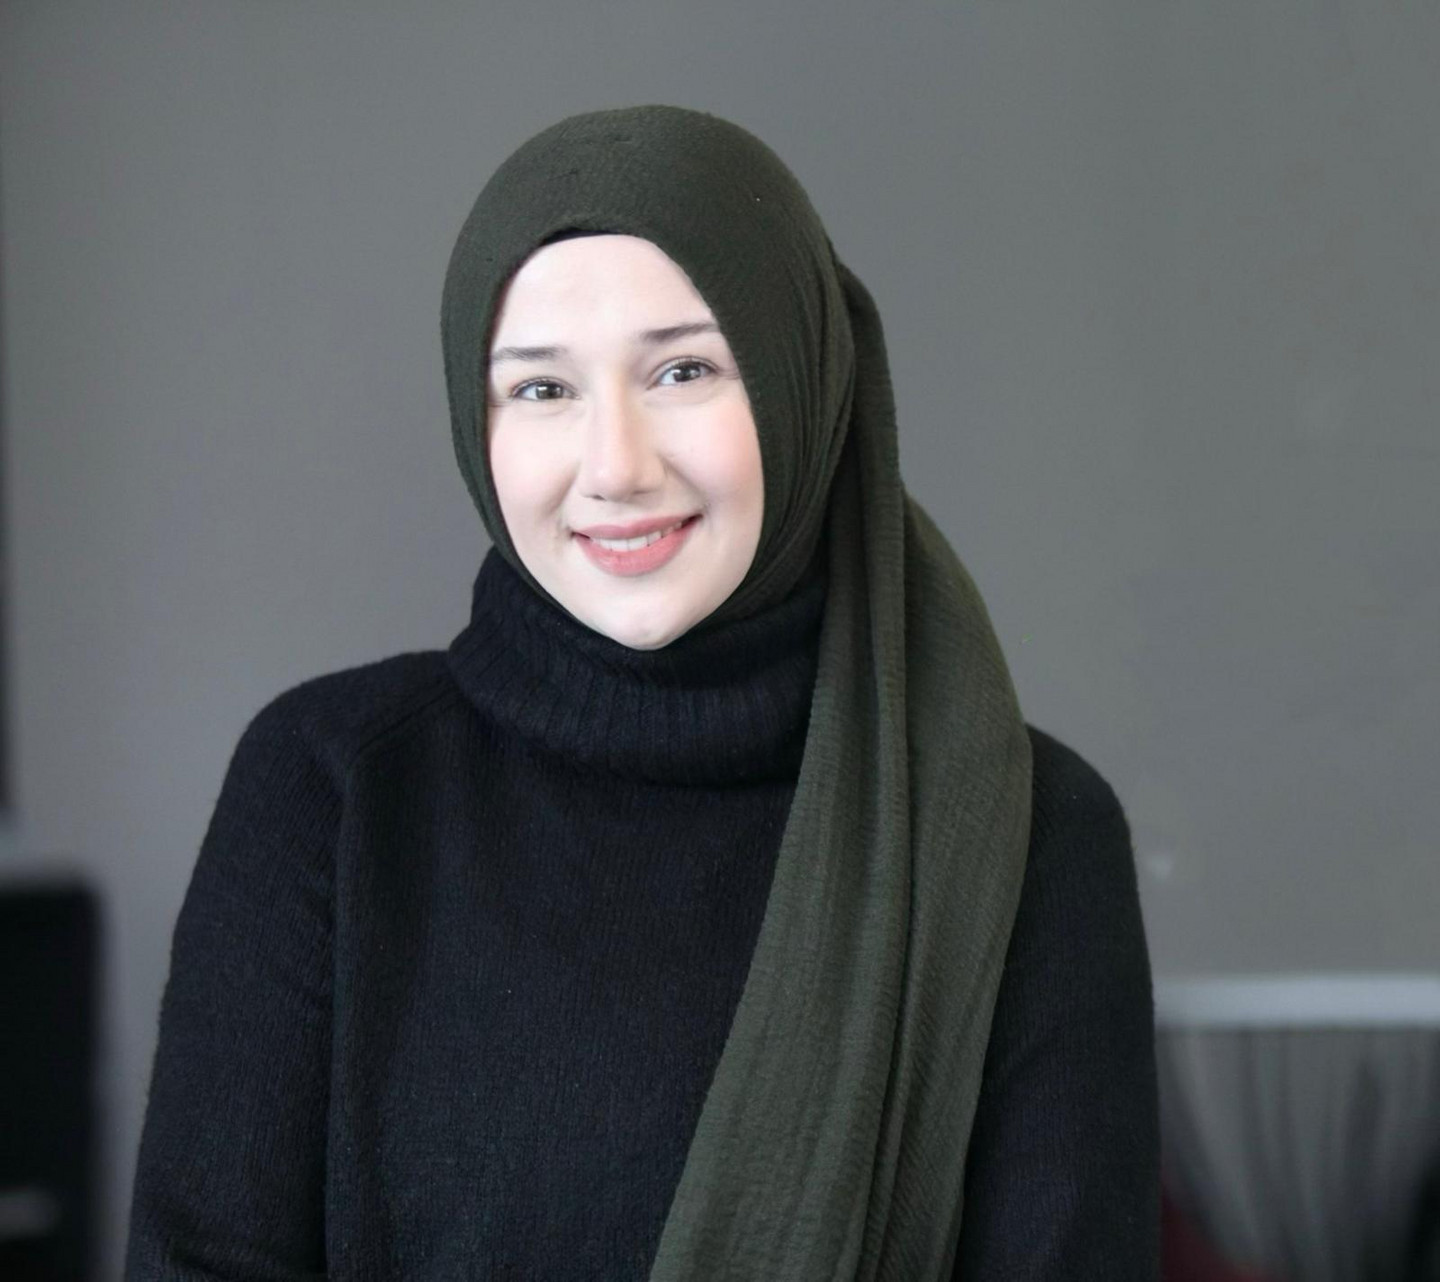 Portrait of Rumeysa Ceylan smiling; she is wearing a black pullover and grey hijab